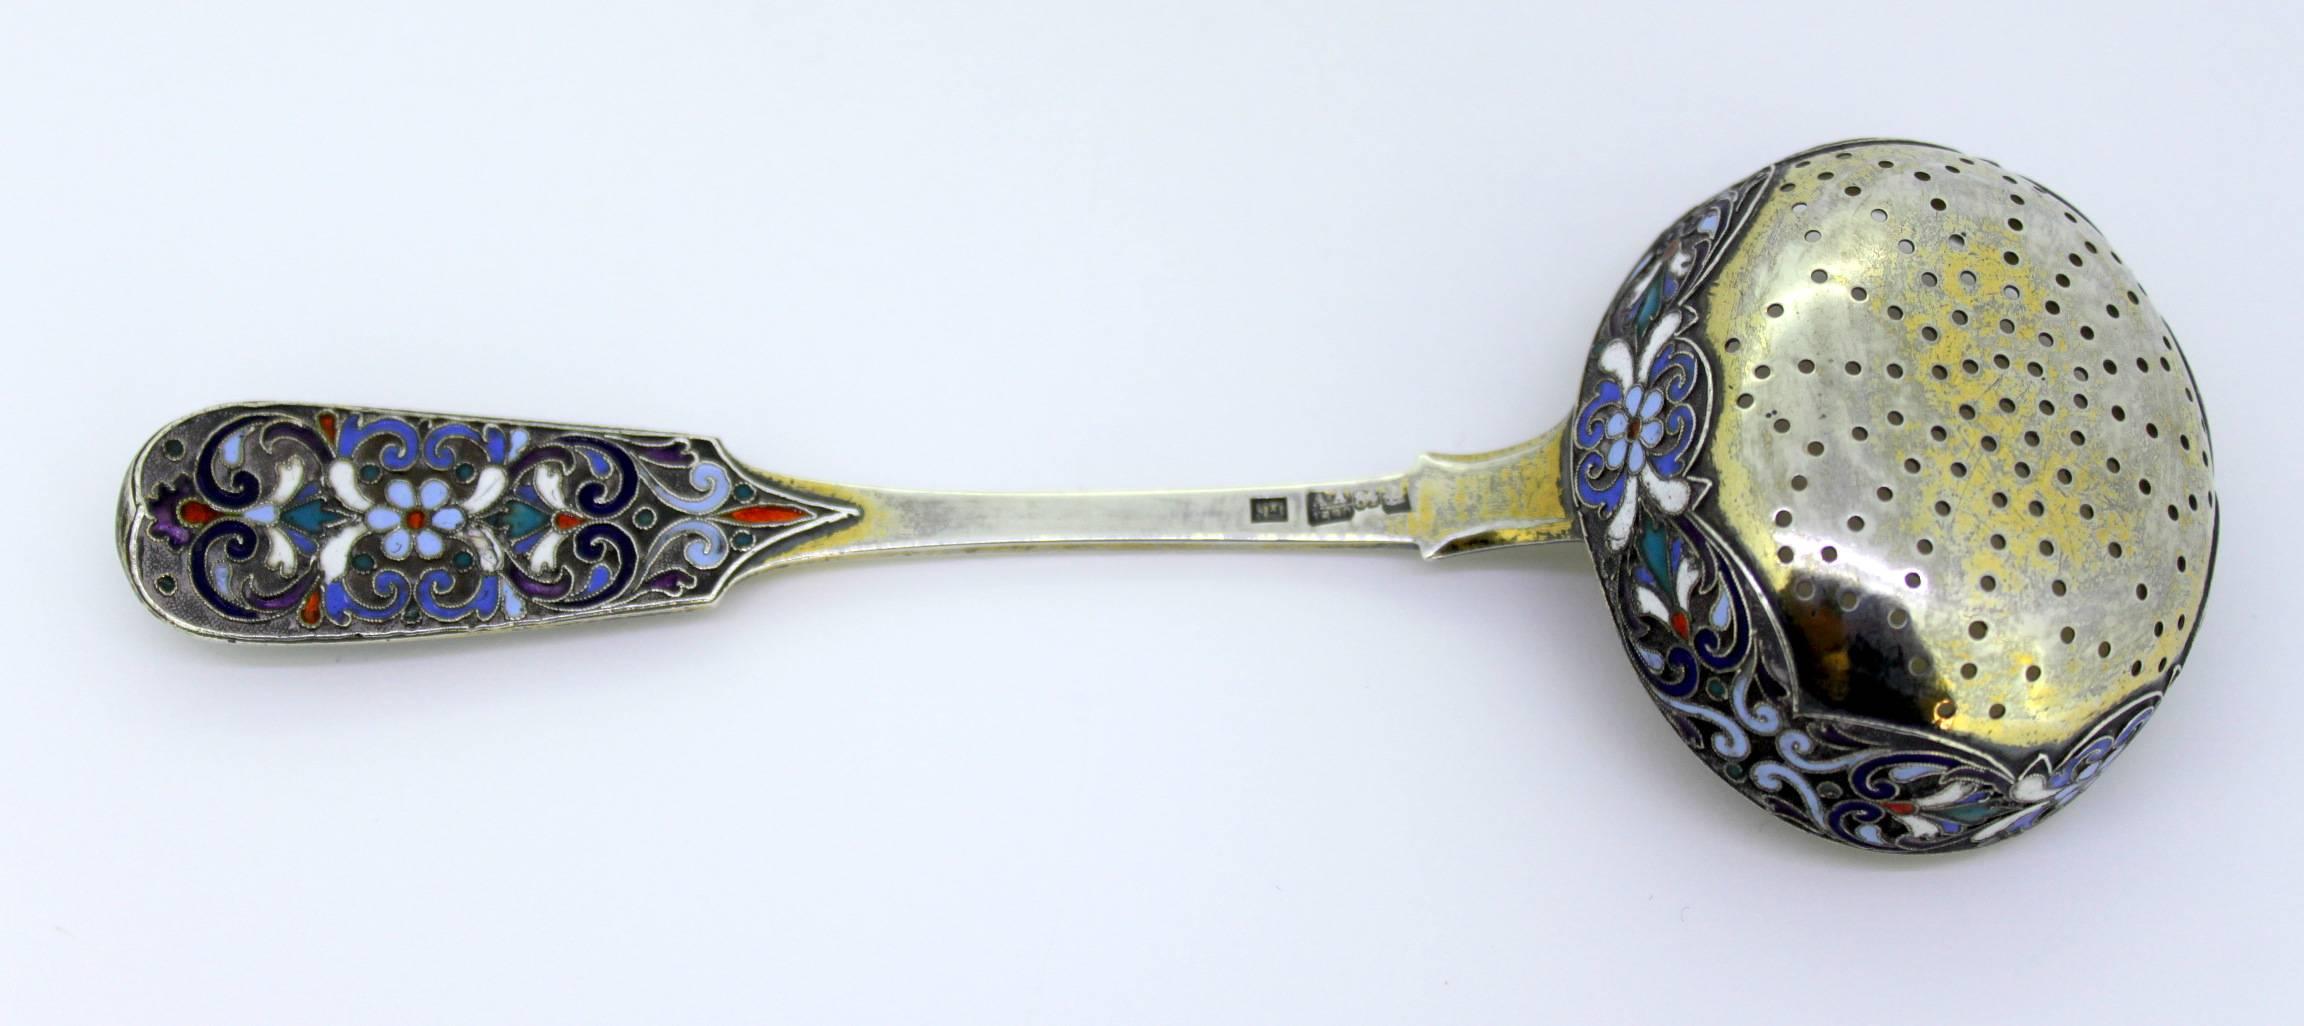 Antique Russian silver and enamel tea strainer
Made in Russia, St. Petersburg, 1890
Maker: GK
Assayer: Anatoly Apollonovich Artsybashev
Fully hallmarked.

Dimensions:
Size : 15.8 x 5.7 x 3 cm
Total Weight: 61 grams total.

Condition: